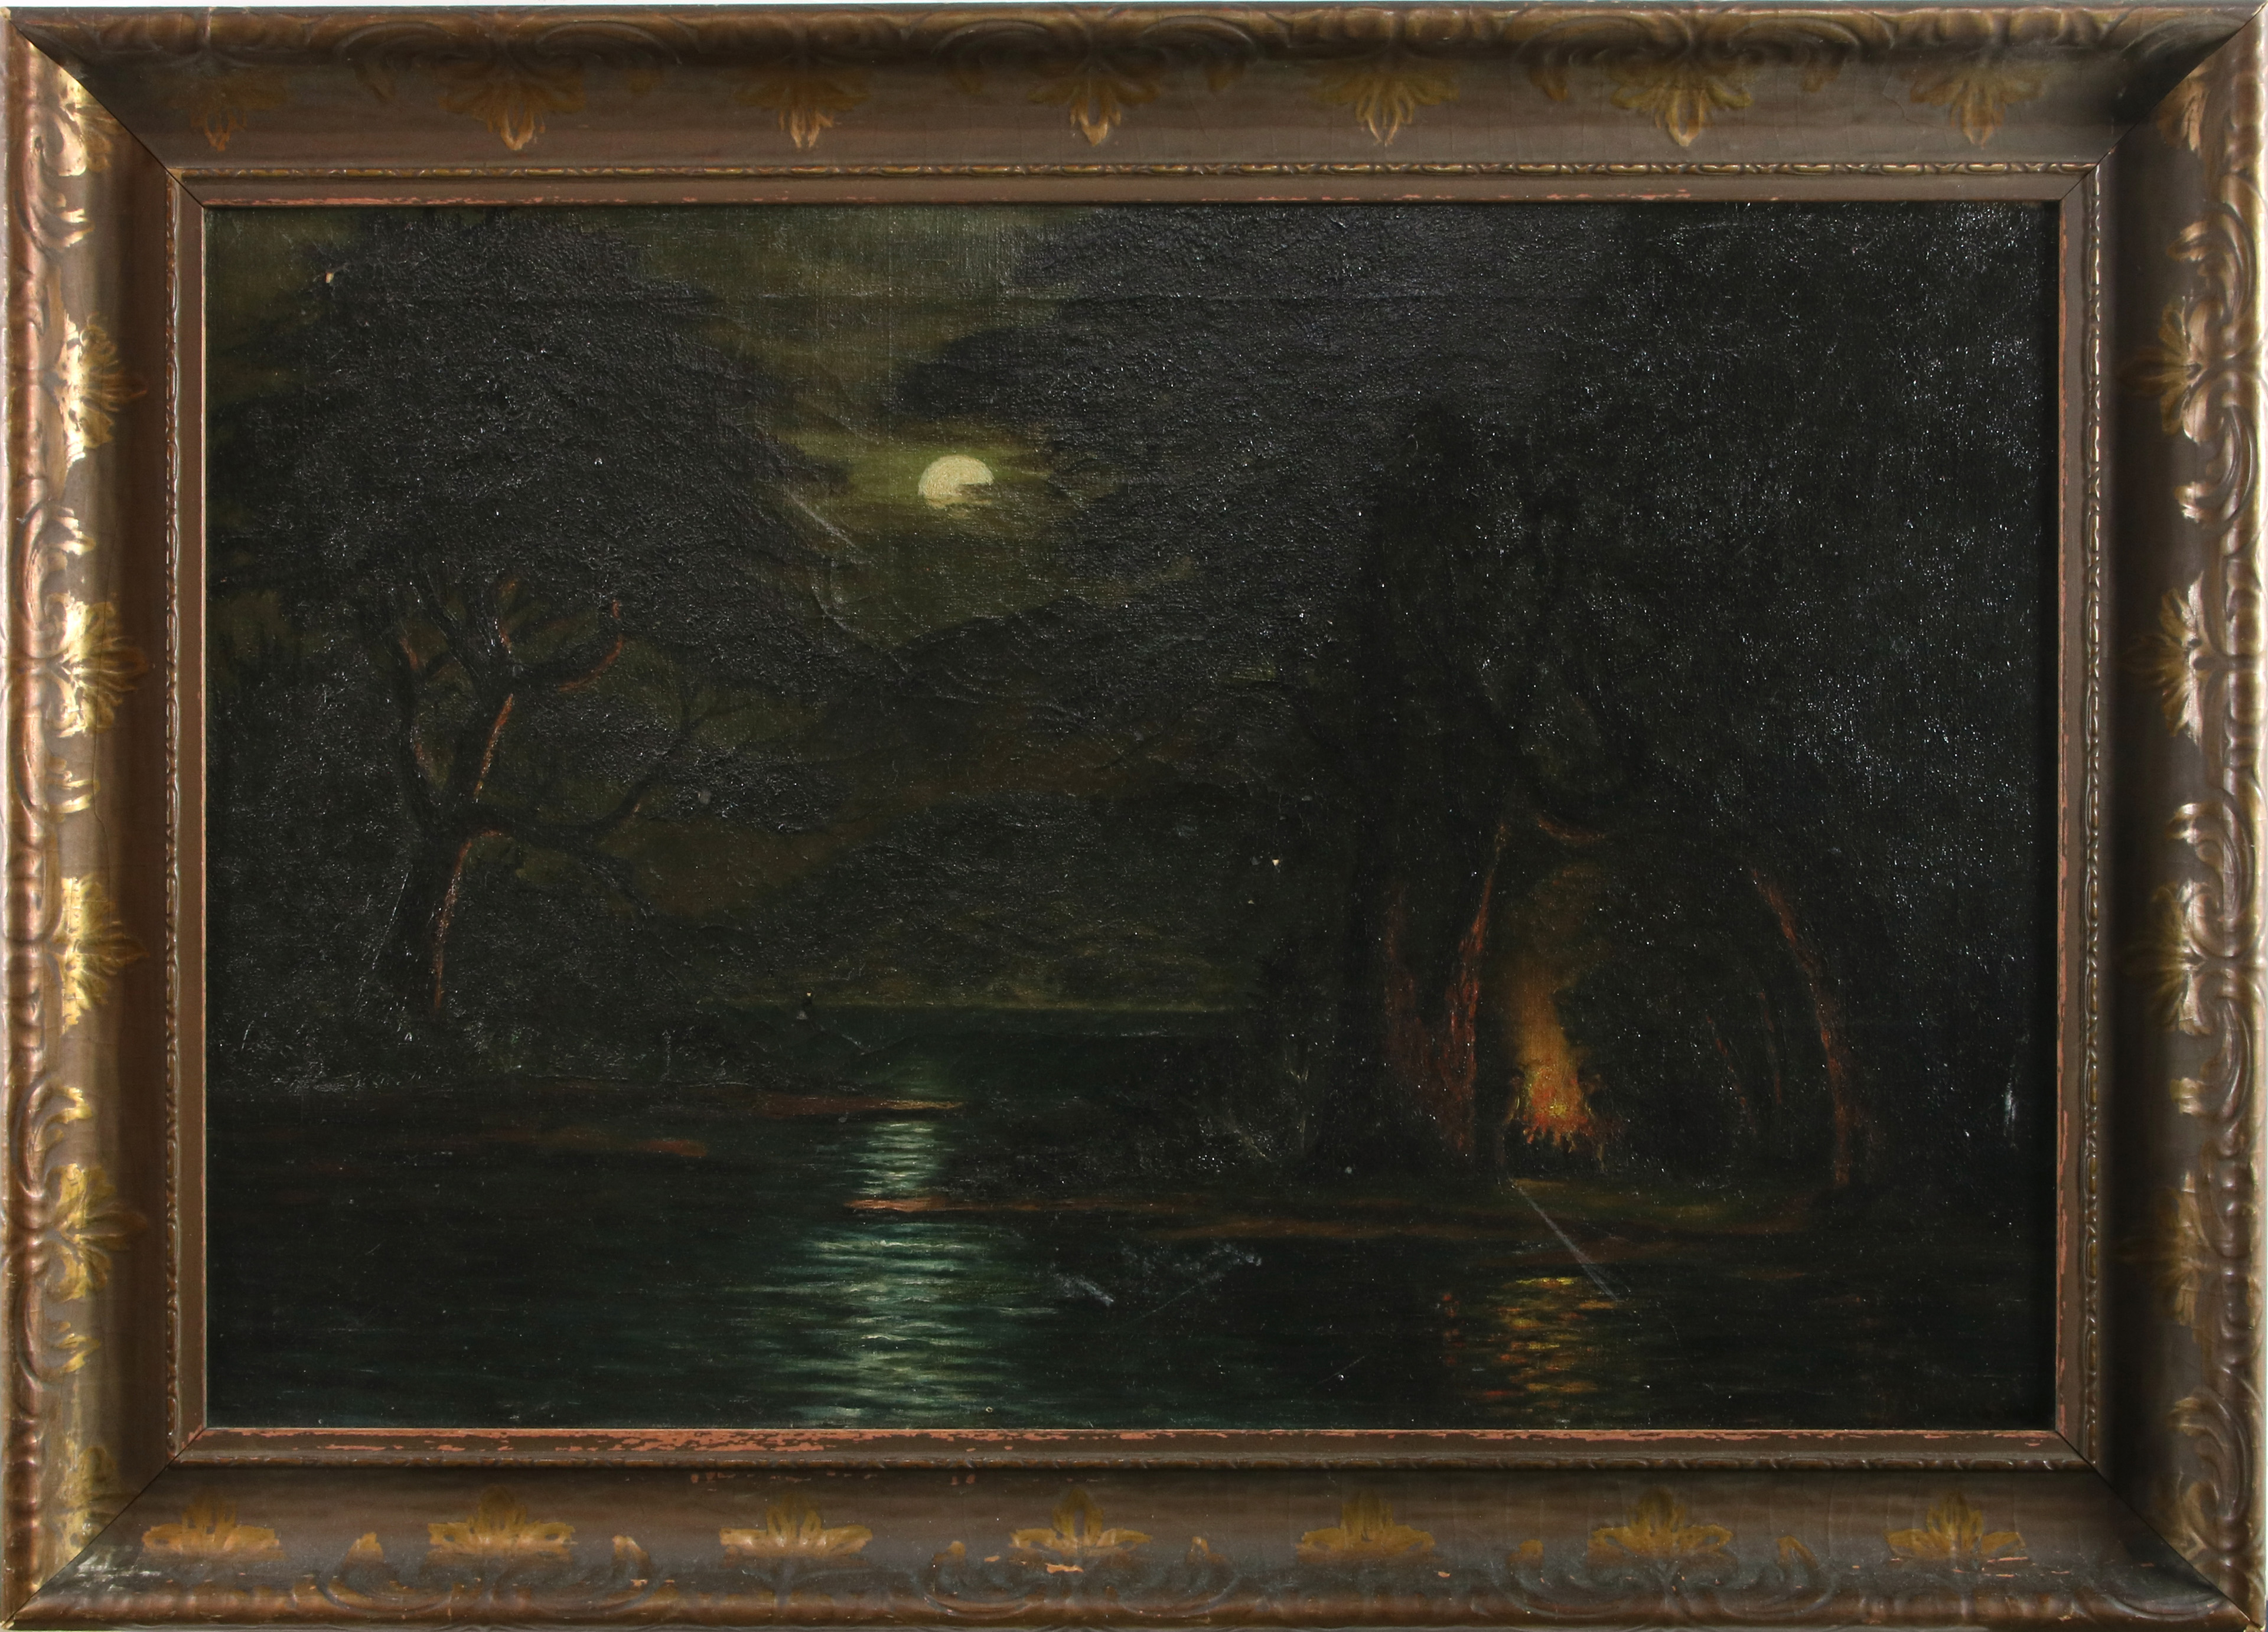 PAINTING MOONLIGHT CAMPFIRE American 3a4e65